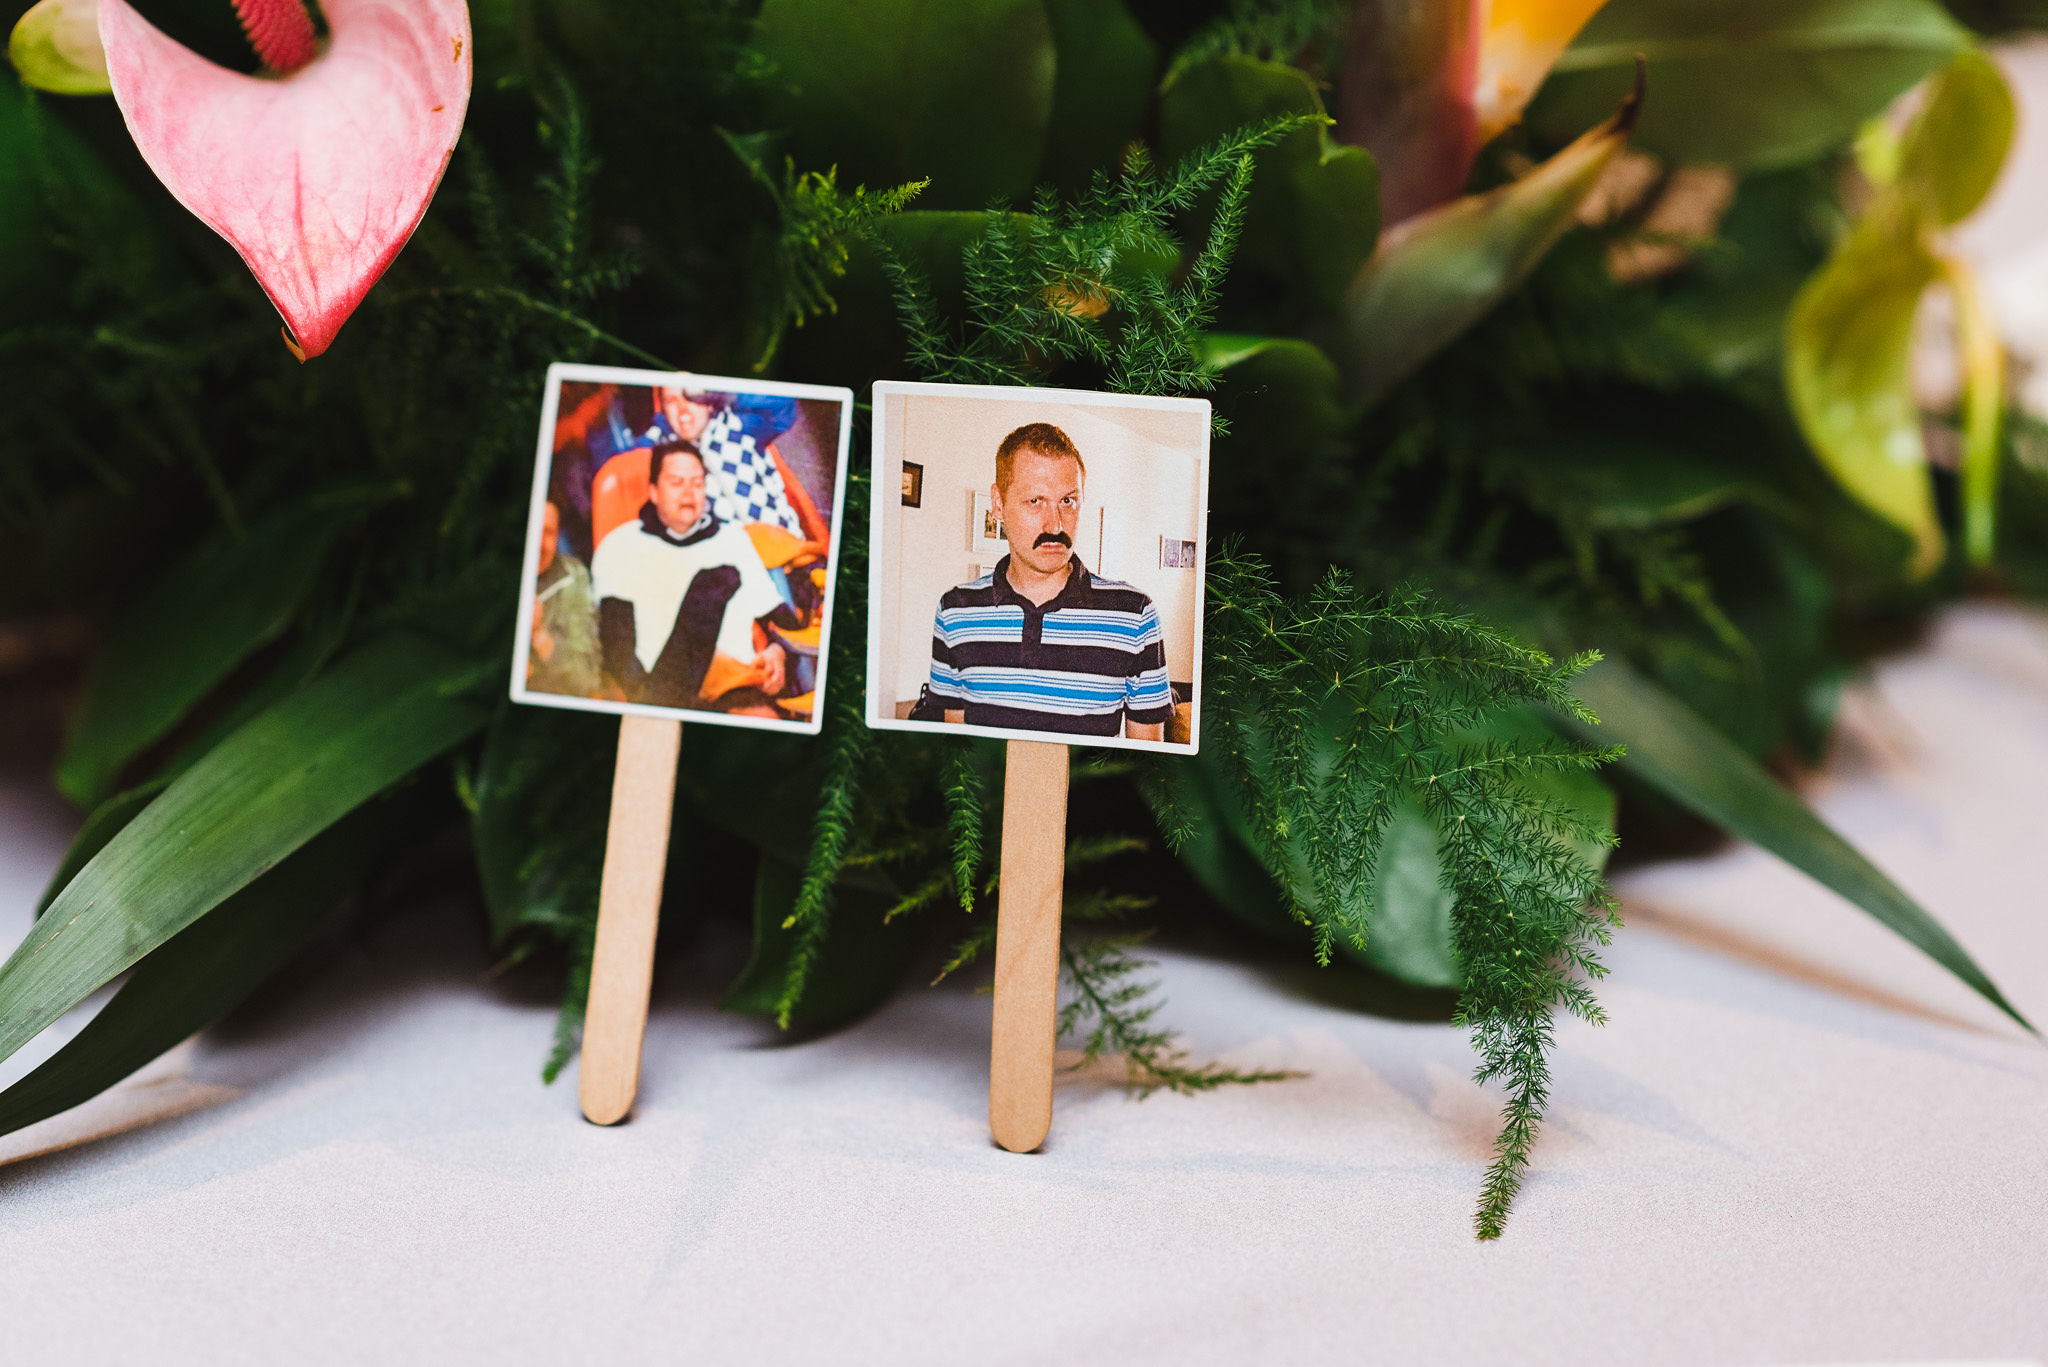 pictures of the grooms printed on paper and stuck to popsicle sticks on the table during wedding ceremony at the Hilton Fallsview in Niagara Falls